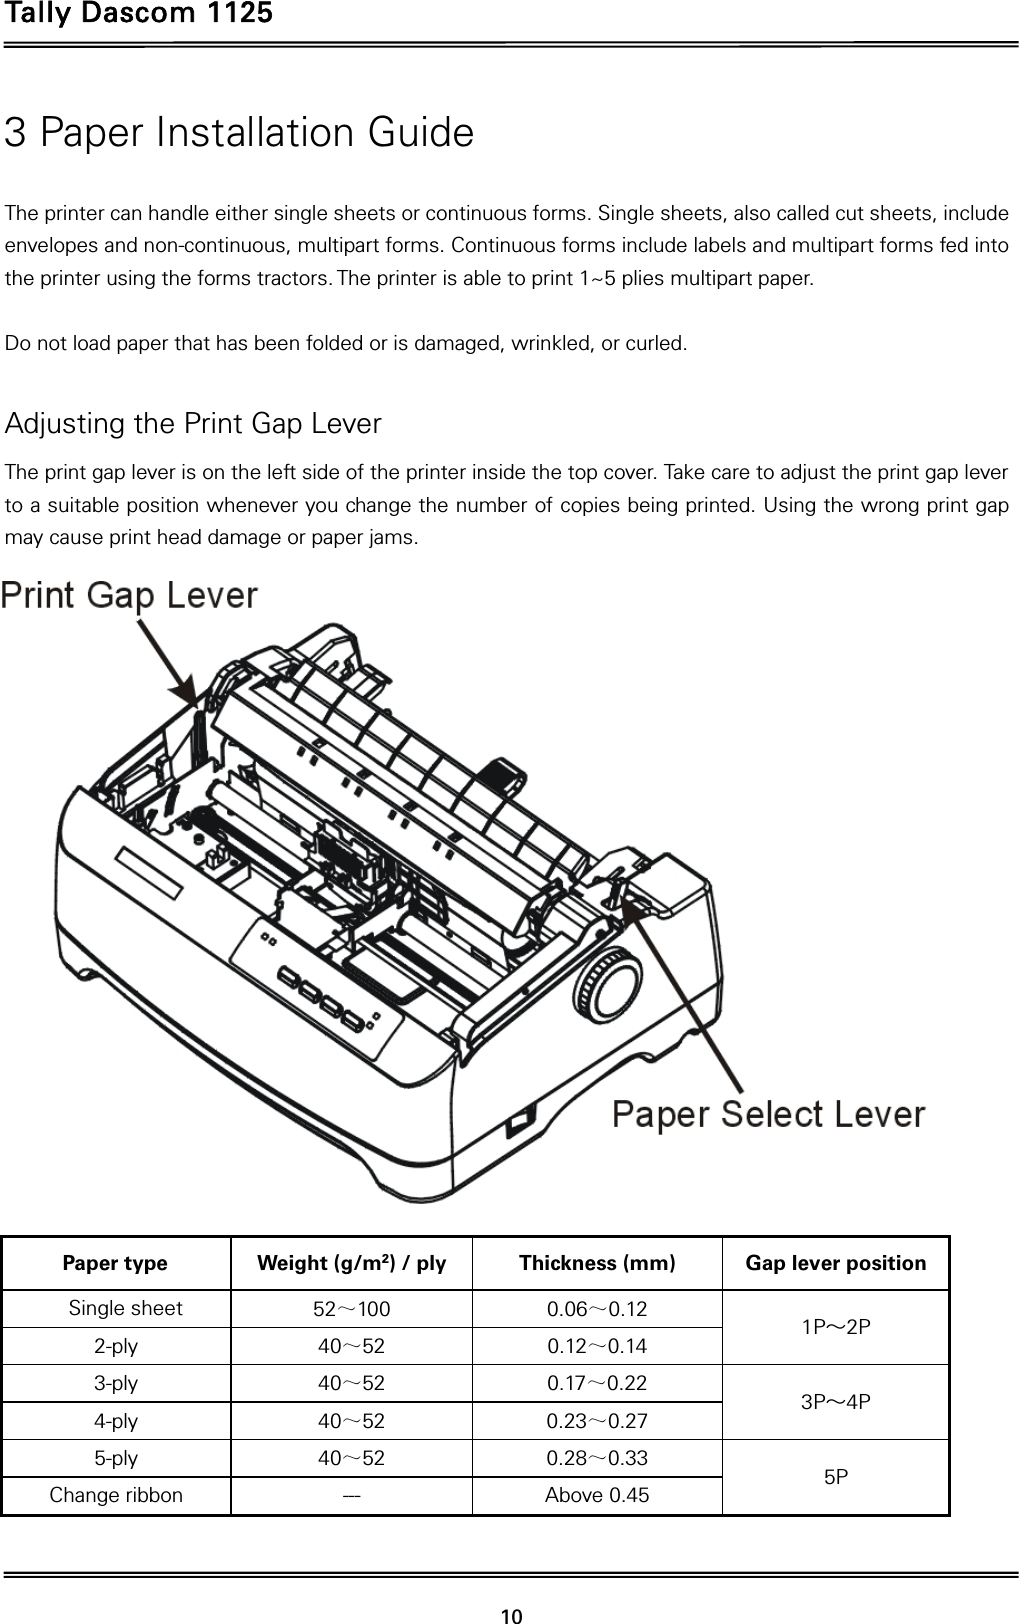 Tally Dascom 1125 10 3 Paper Installation Guide  The printer can handle either single sheets or continuous forms. Single sheets, also called cut sheets, include envelopes and non-continuous, multipart forms. Continuous forms include labels and multipart forms fed into the printer using the forms tractors. The printer is able to print 1~5 plies multipart paper.  Do not load paper that has been folded or is damaged, wrinkled, or curled.  Adjusting the Print Gap Lever The print gap lever is on the left side of the printer inside the top cover. Take care to adjust the print gap lever to a suitable position whenever you change the number of copies being printed. Using the wrong print gap may cause print head damage or paper jams.                      Paper type  Weight (g/m2) / ply  Thickness (mm)  Gap lever position Single sheet  52̚100 0.06̚0.12  1PЊ2P 2-ply  40̚52 0.12̚0.14 3-ply  40̚52 0.17̚0.22  3PЊ4P 4-ply  40̚52 0.23̚0.27 5-ply  40̚52 0.28̚0.33  5P Change ribbon  ---  Above 0.45  